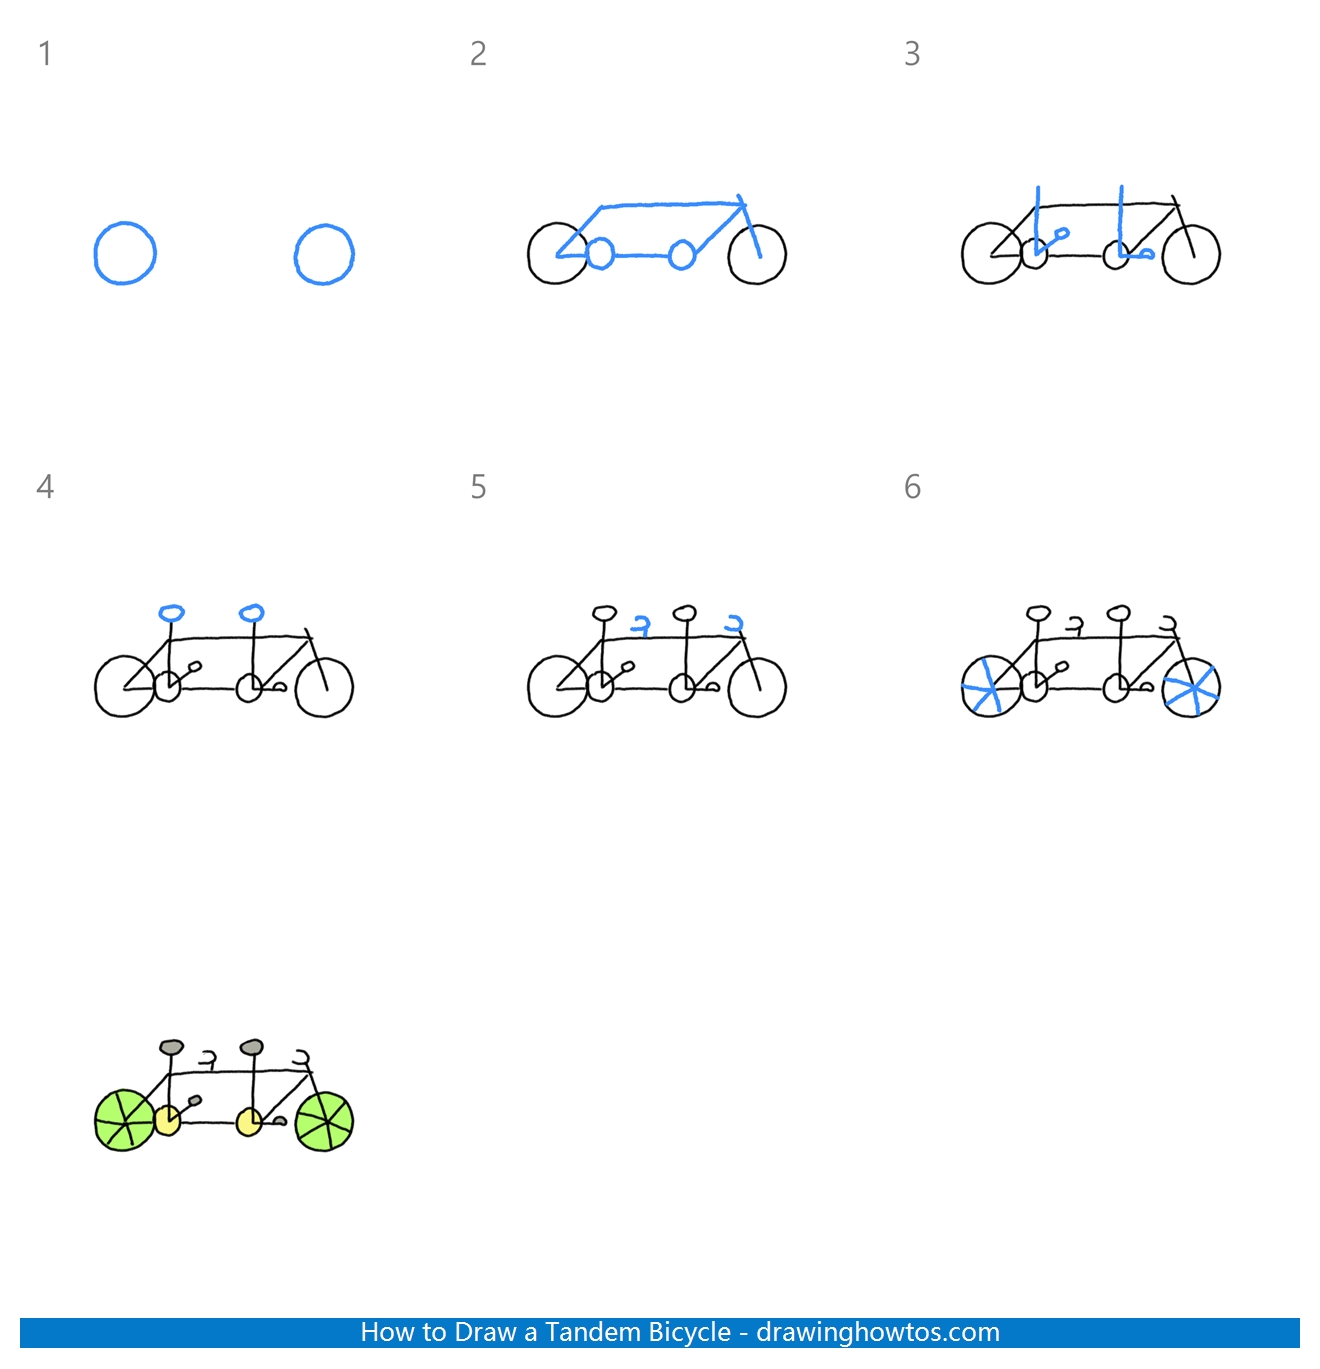 How to Draw a Tandem Bicycle Step by Step